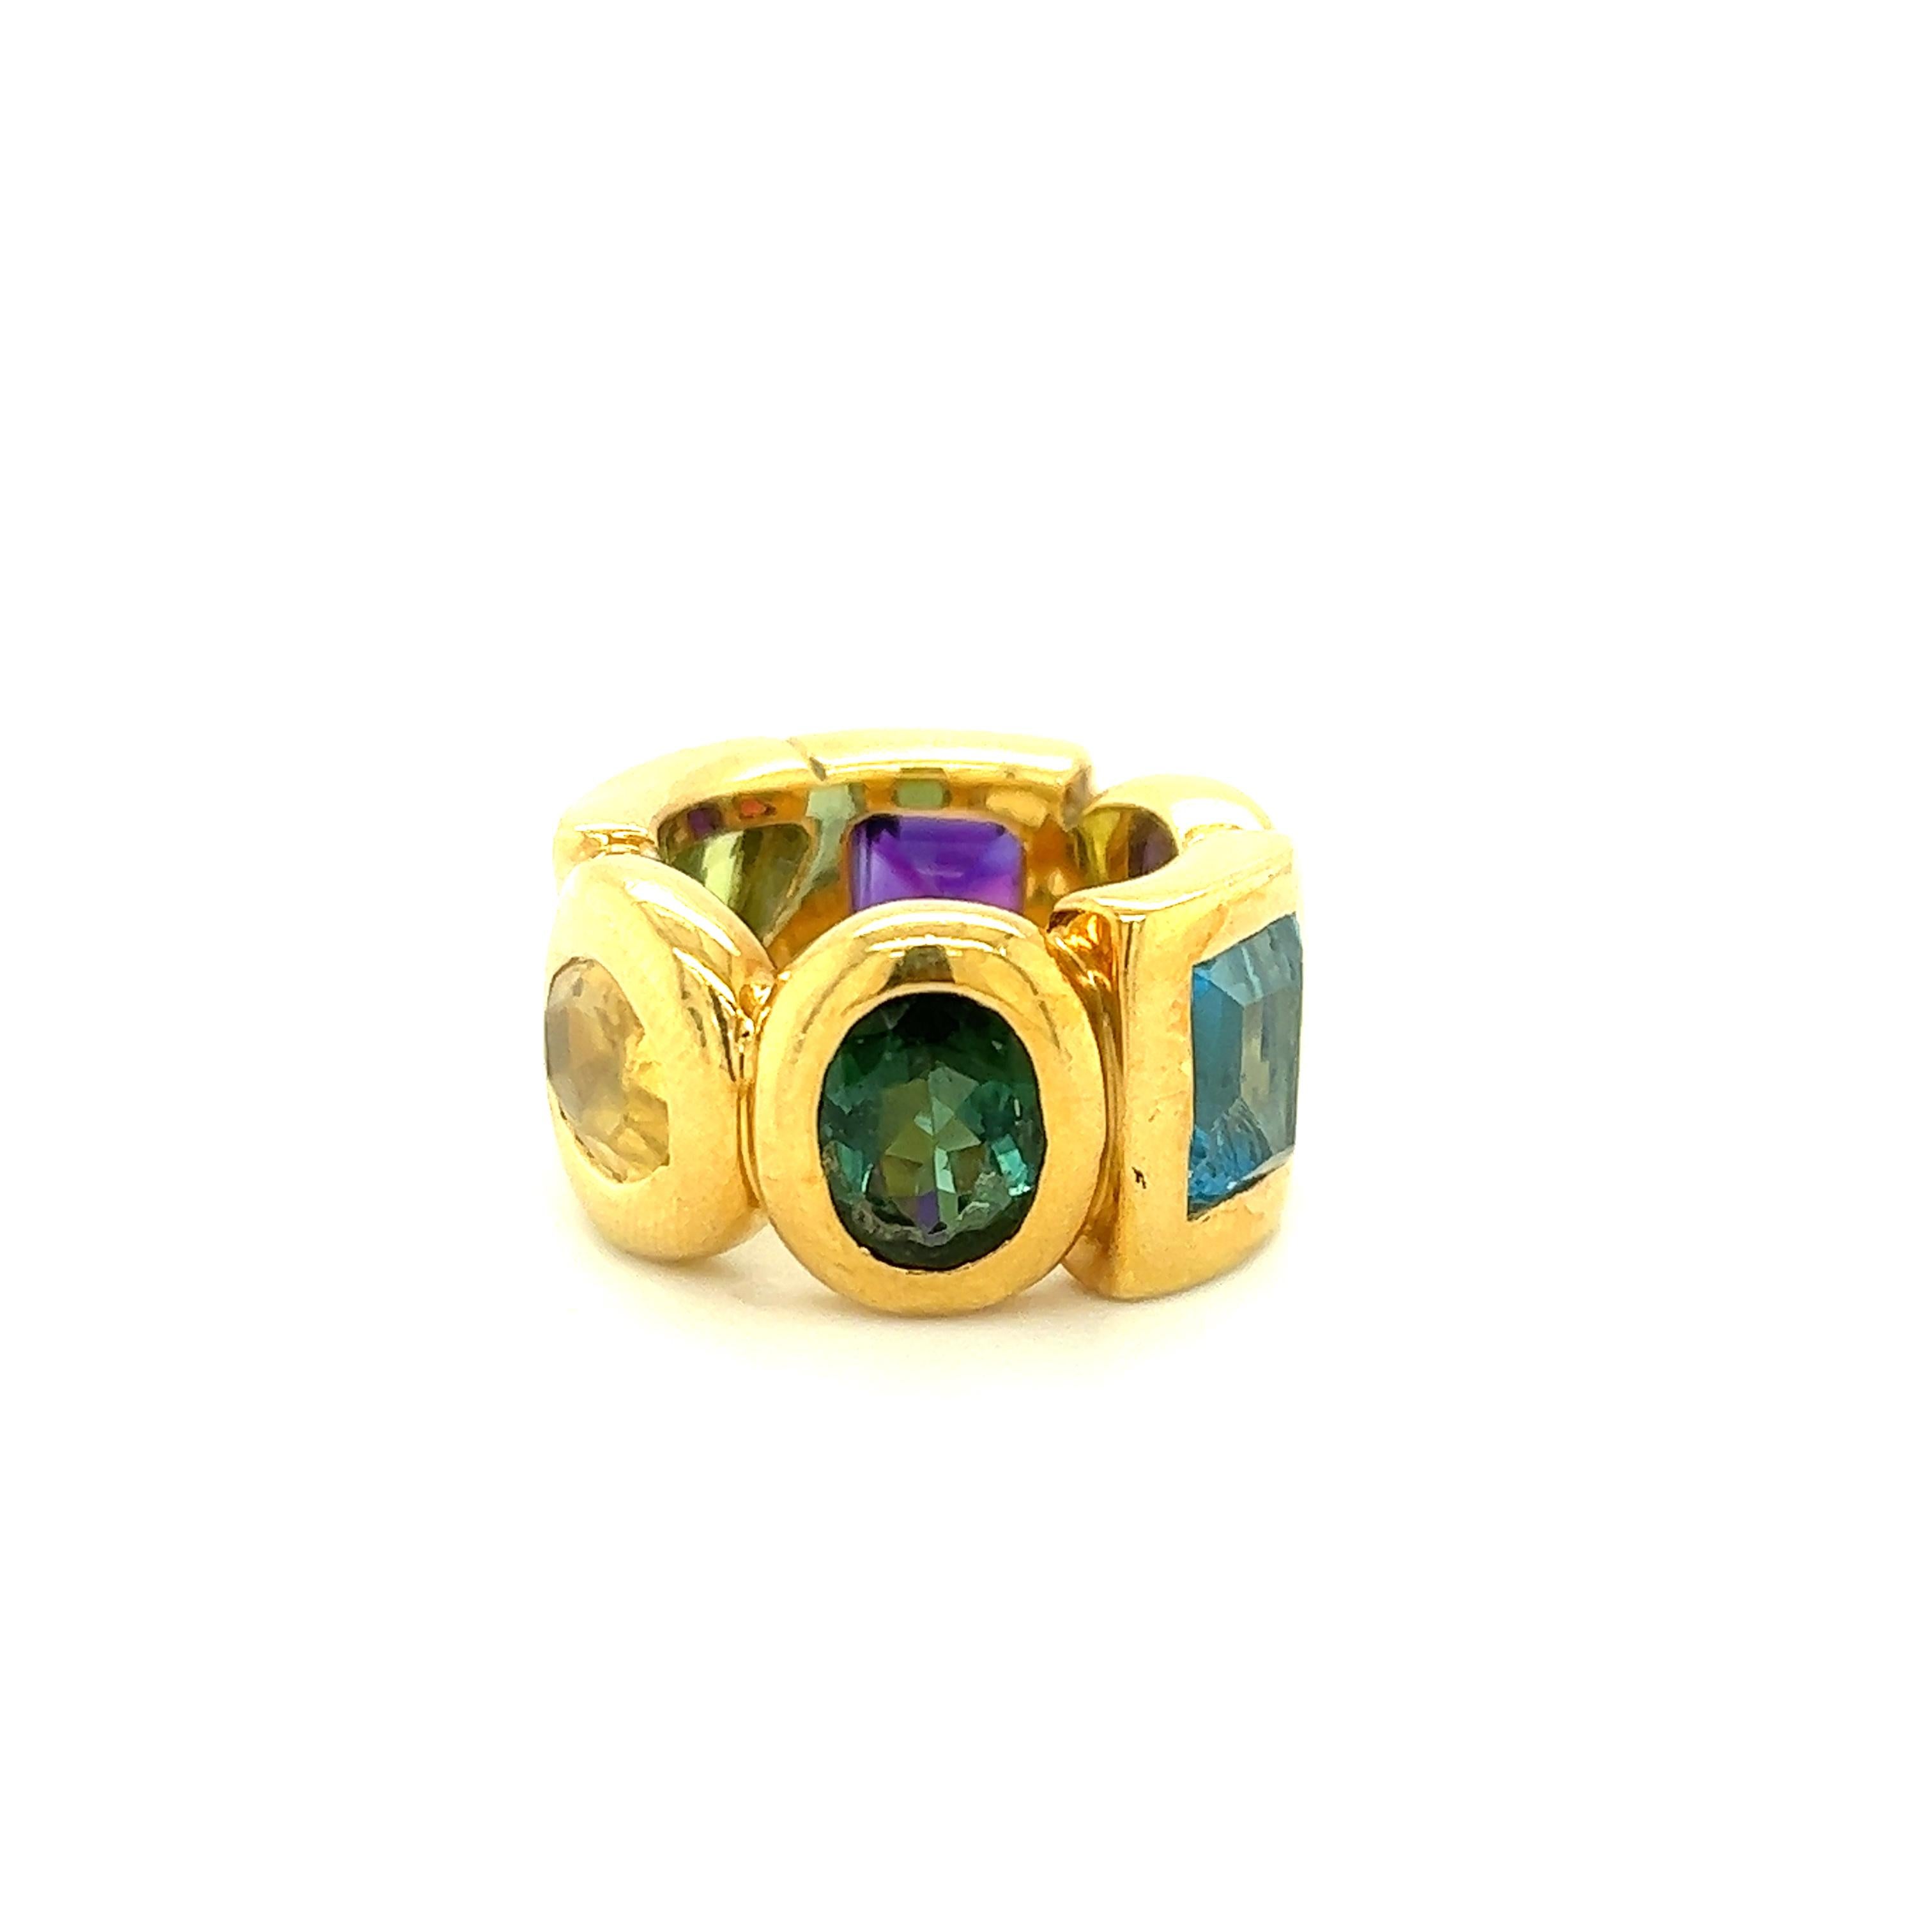 Fantastic ring crafted by famed designer Chanel in 18k yellow gold. The ring is a wide band design and decorated with semi precious gemstones throughout. The ring shows geometric shapes crafted throughout the 18k metal design in triangle, square,